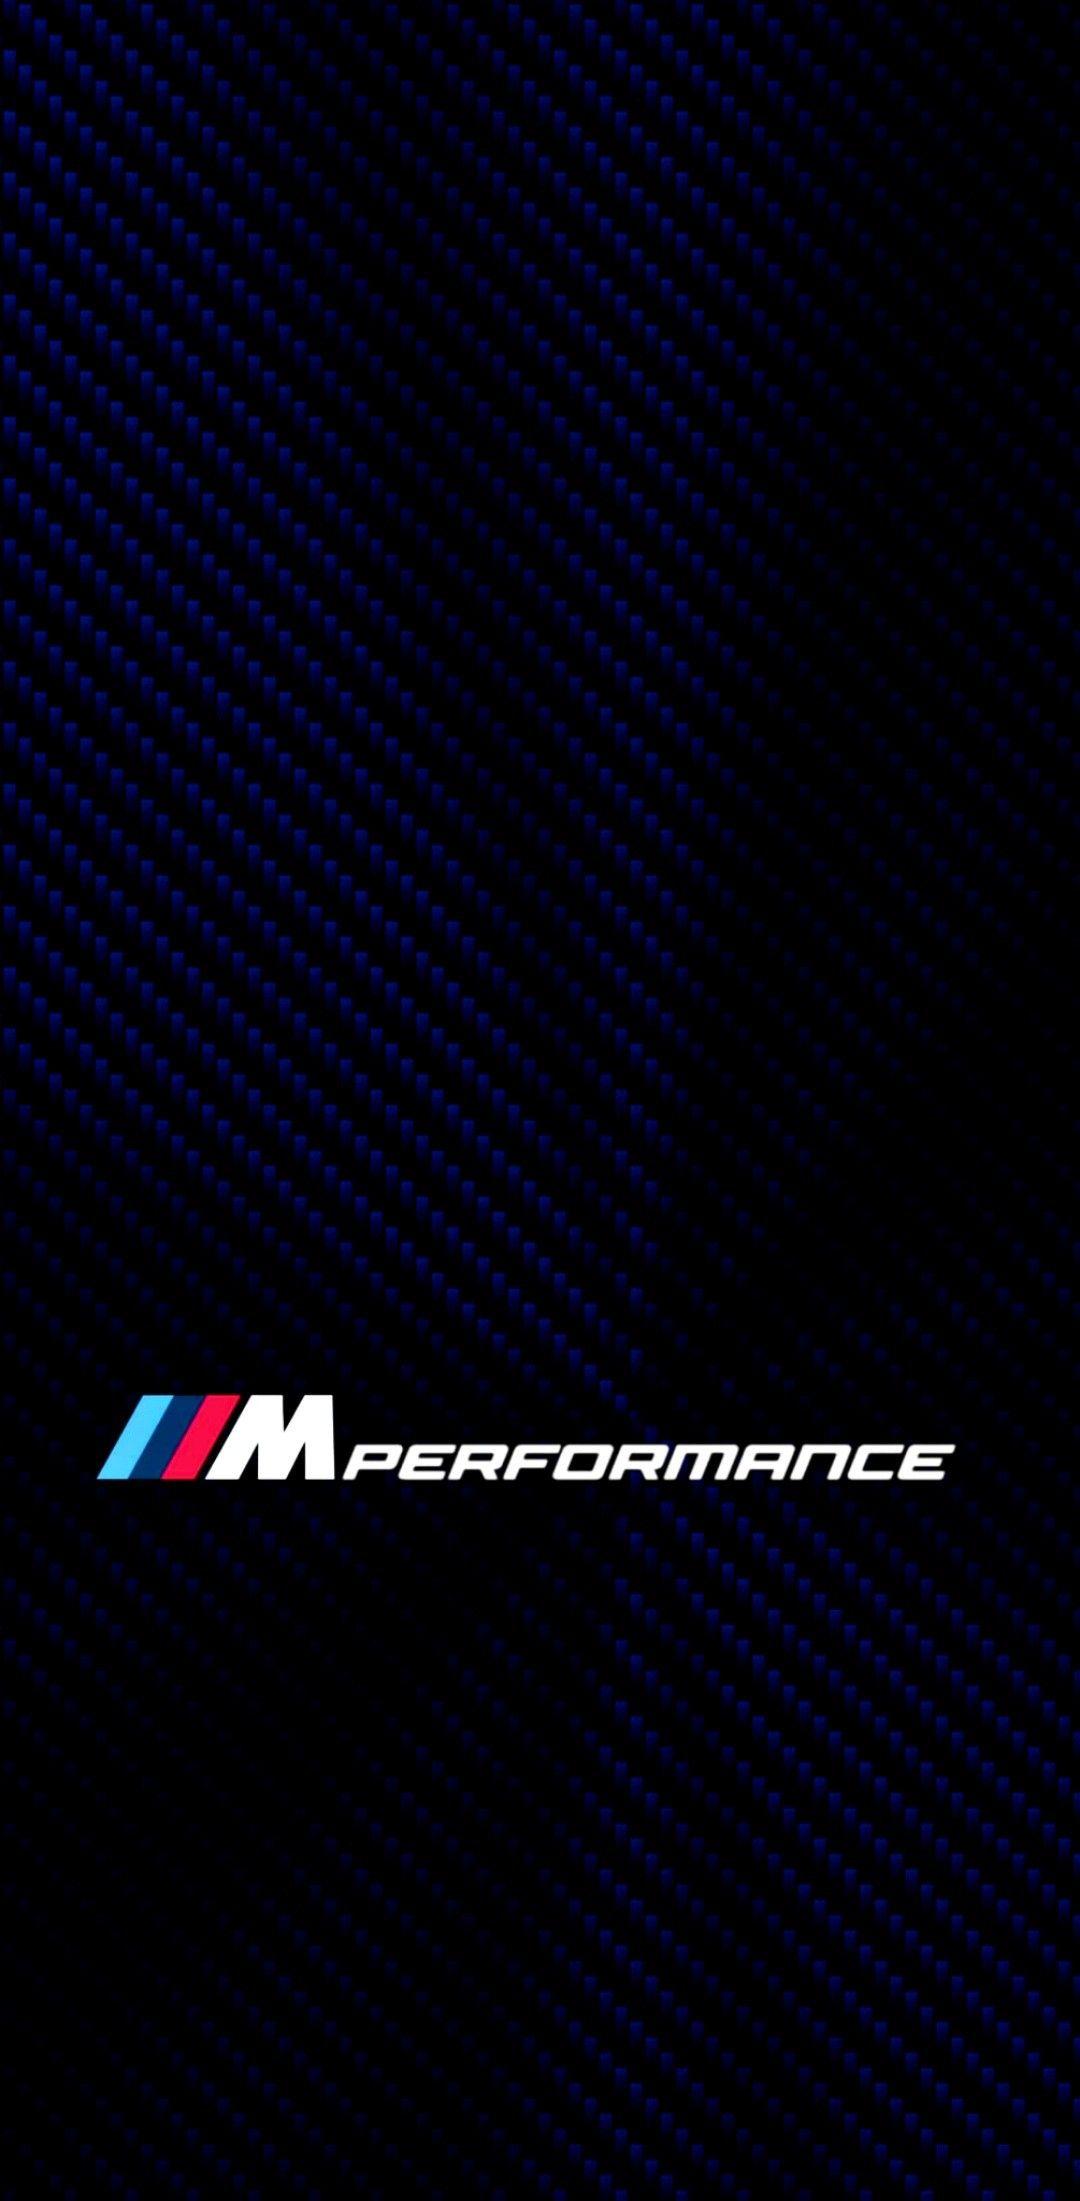 Bmw M Performance Wallpapers - Top Free Bmw M Performance Backgrounds ...